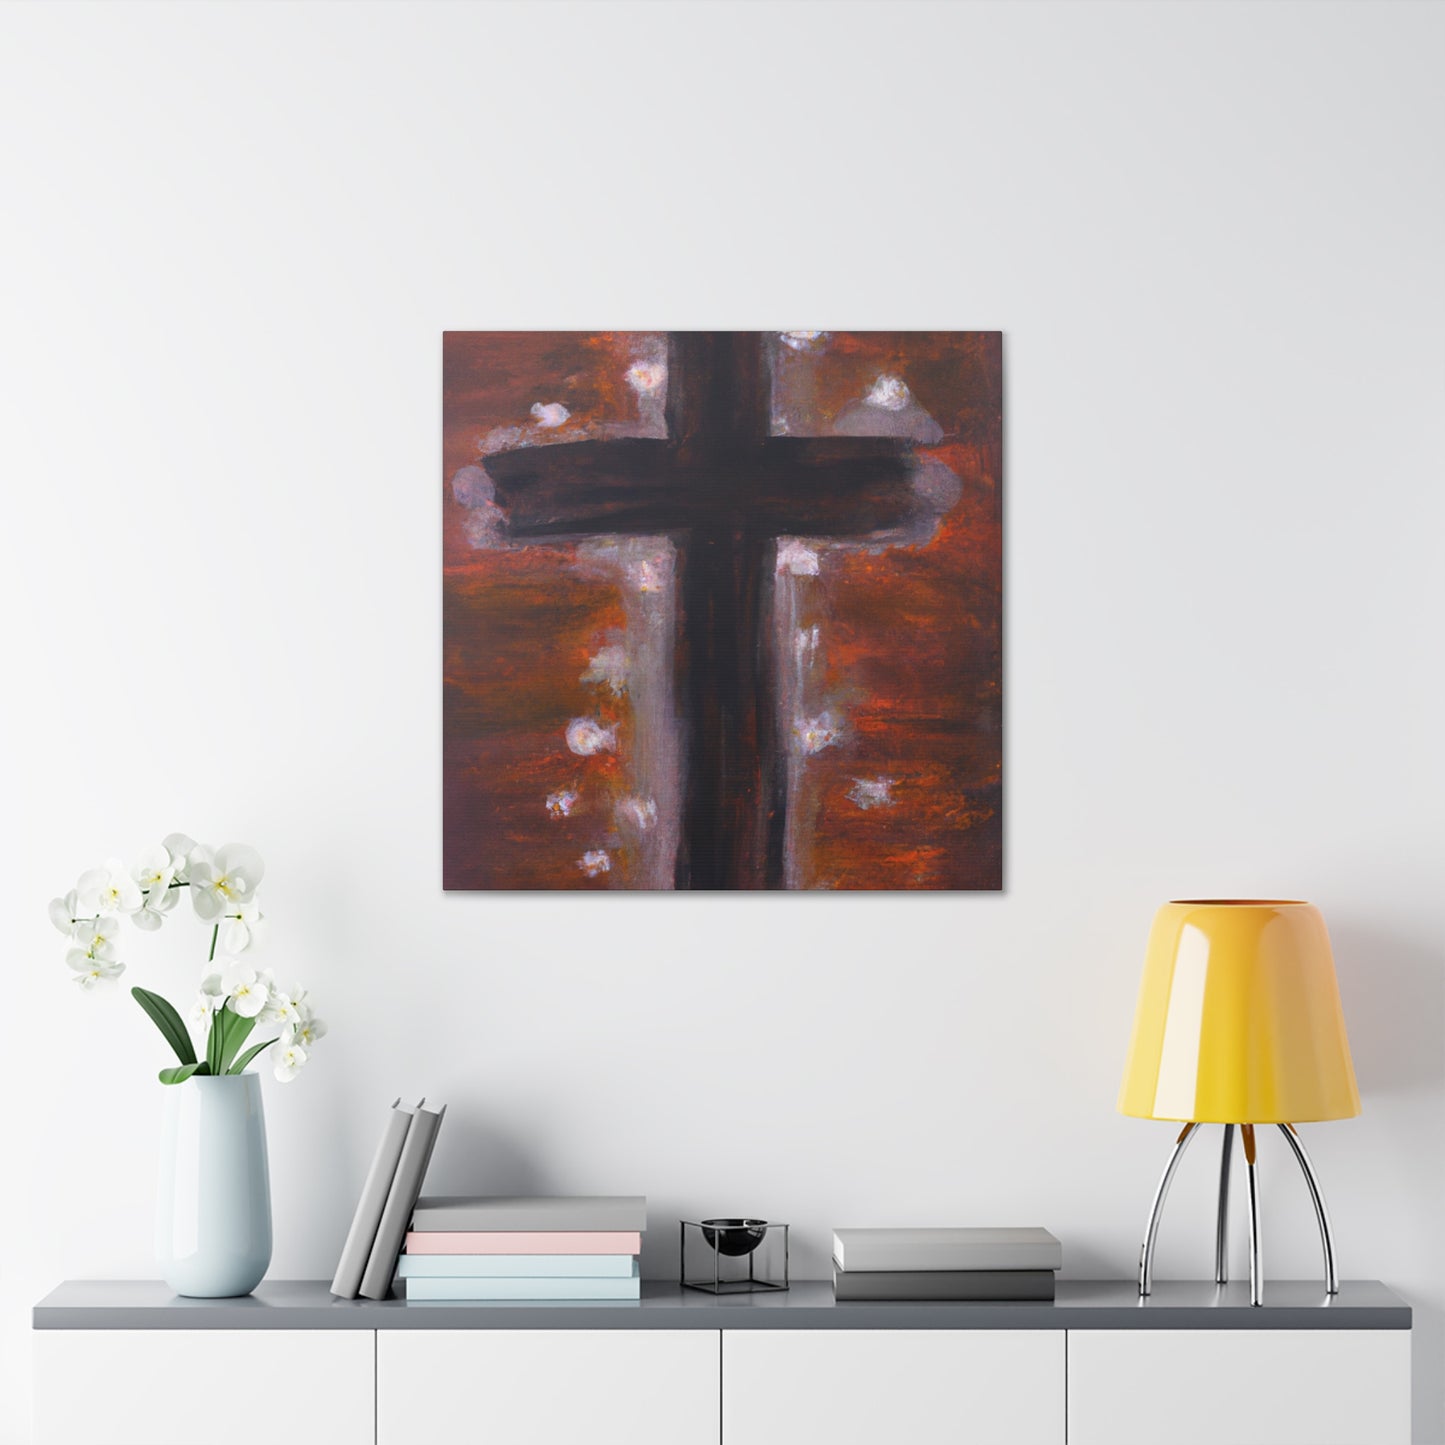 .

Psalm 116:12-13 - "What shall I render to the Lord for all his benefits to me? I will lift up the cup of salvation and call on the name of the Lord." - Canvas Wall Art